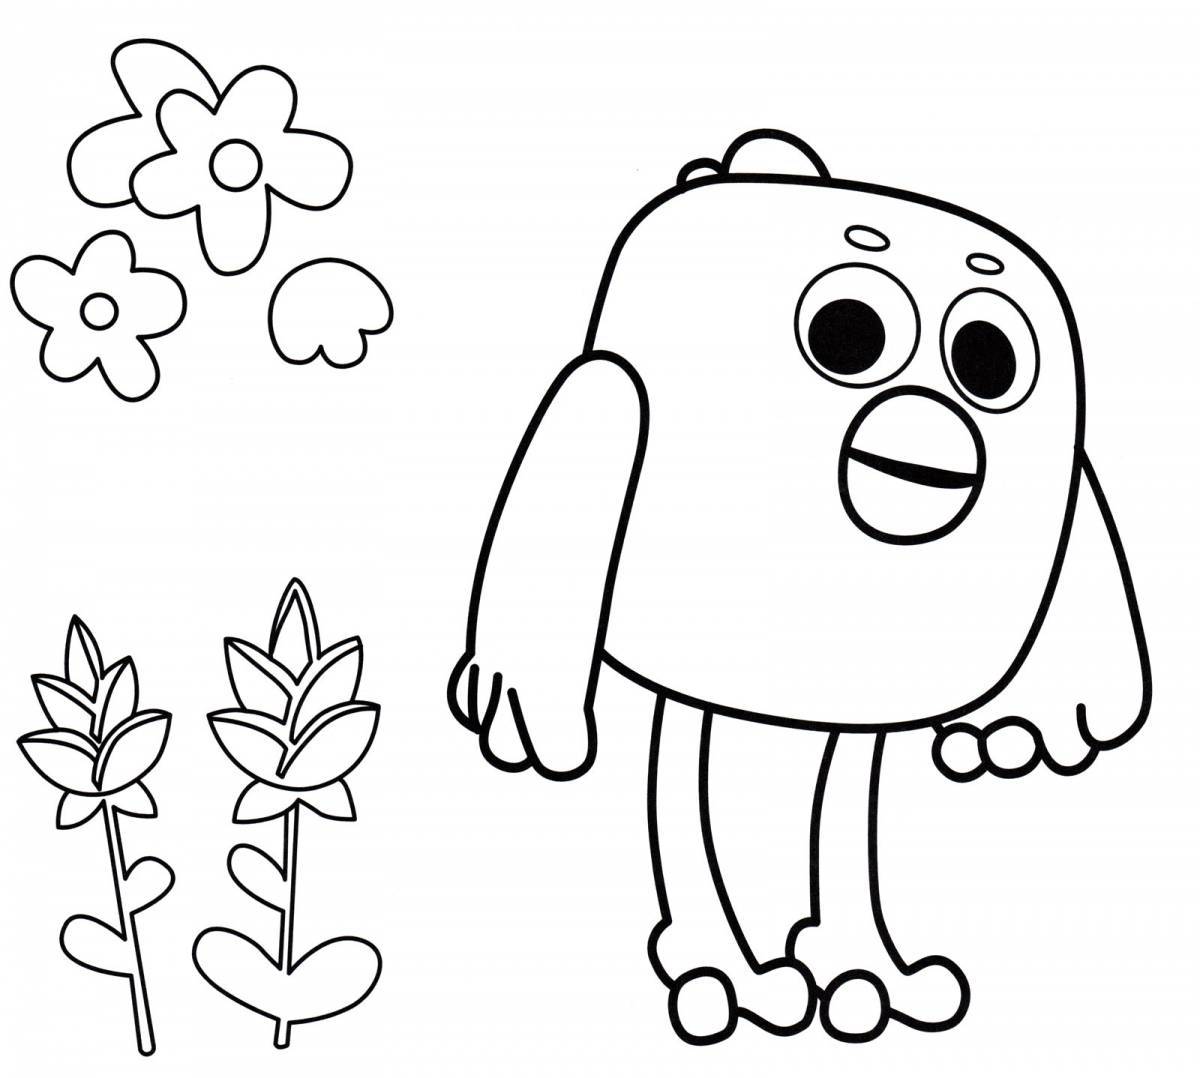 Amazing coloring page turn on facial expressions